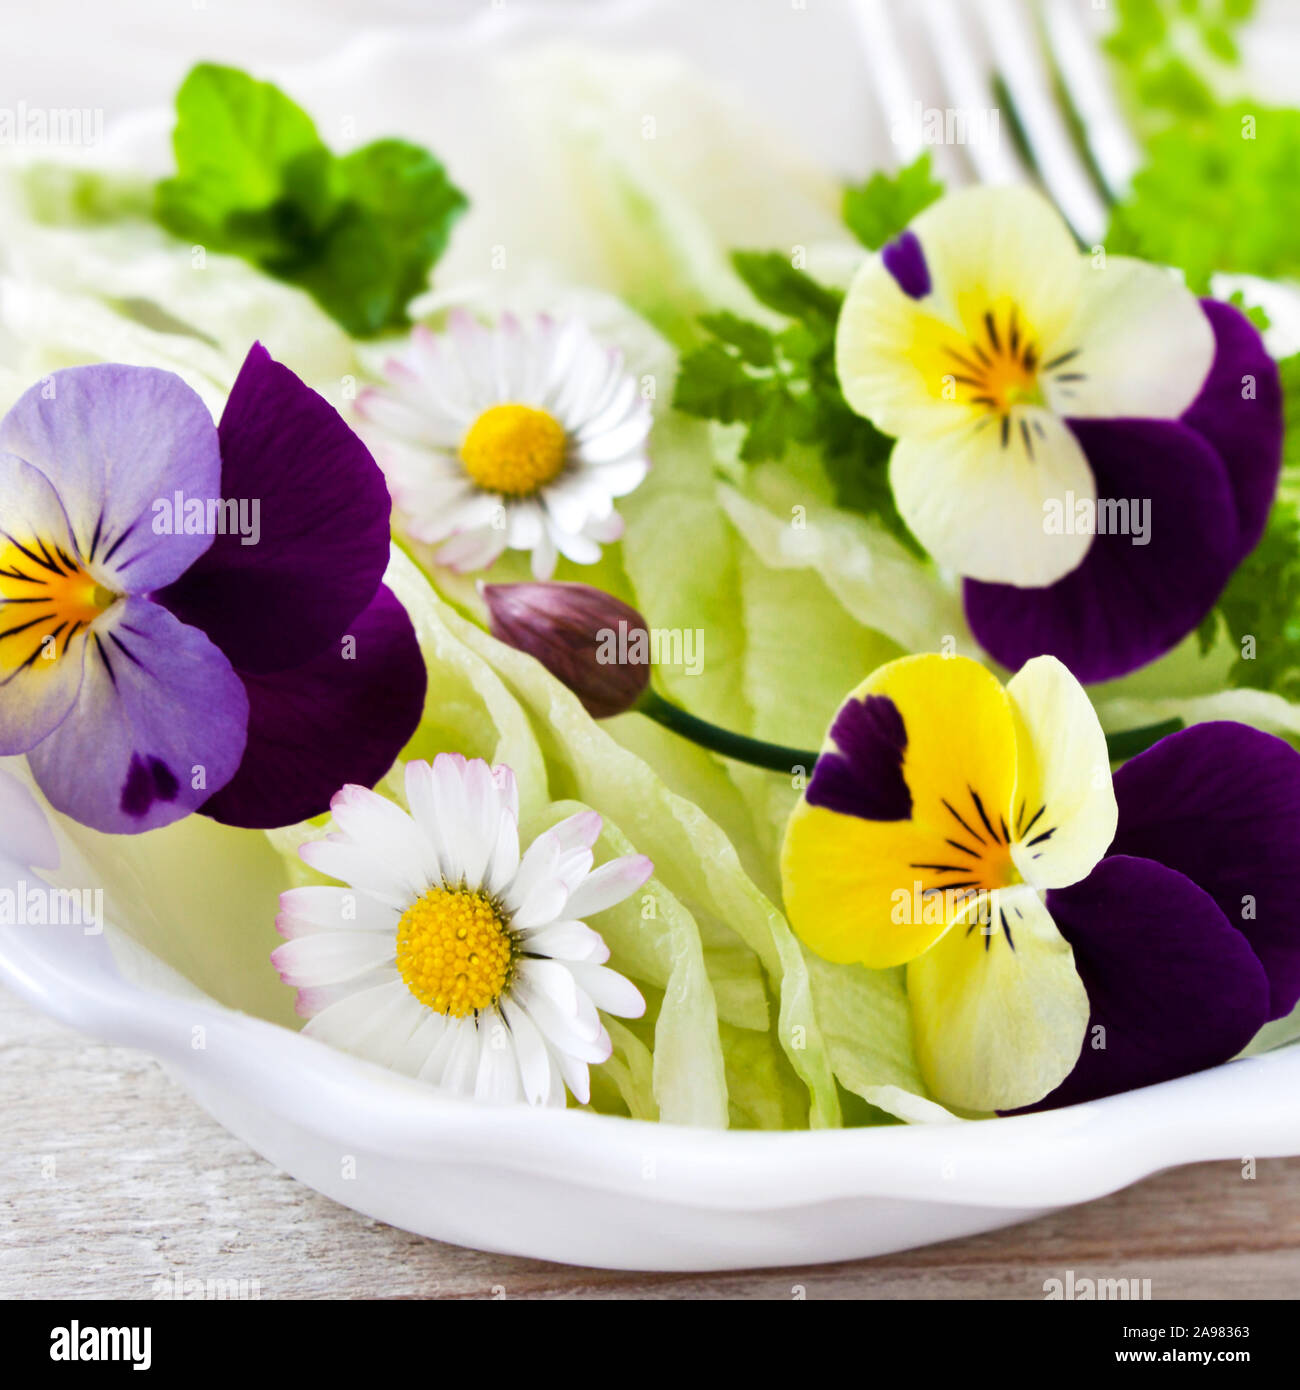 Fresh salad with various eatable flowers Stock Photo